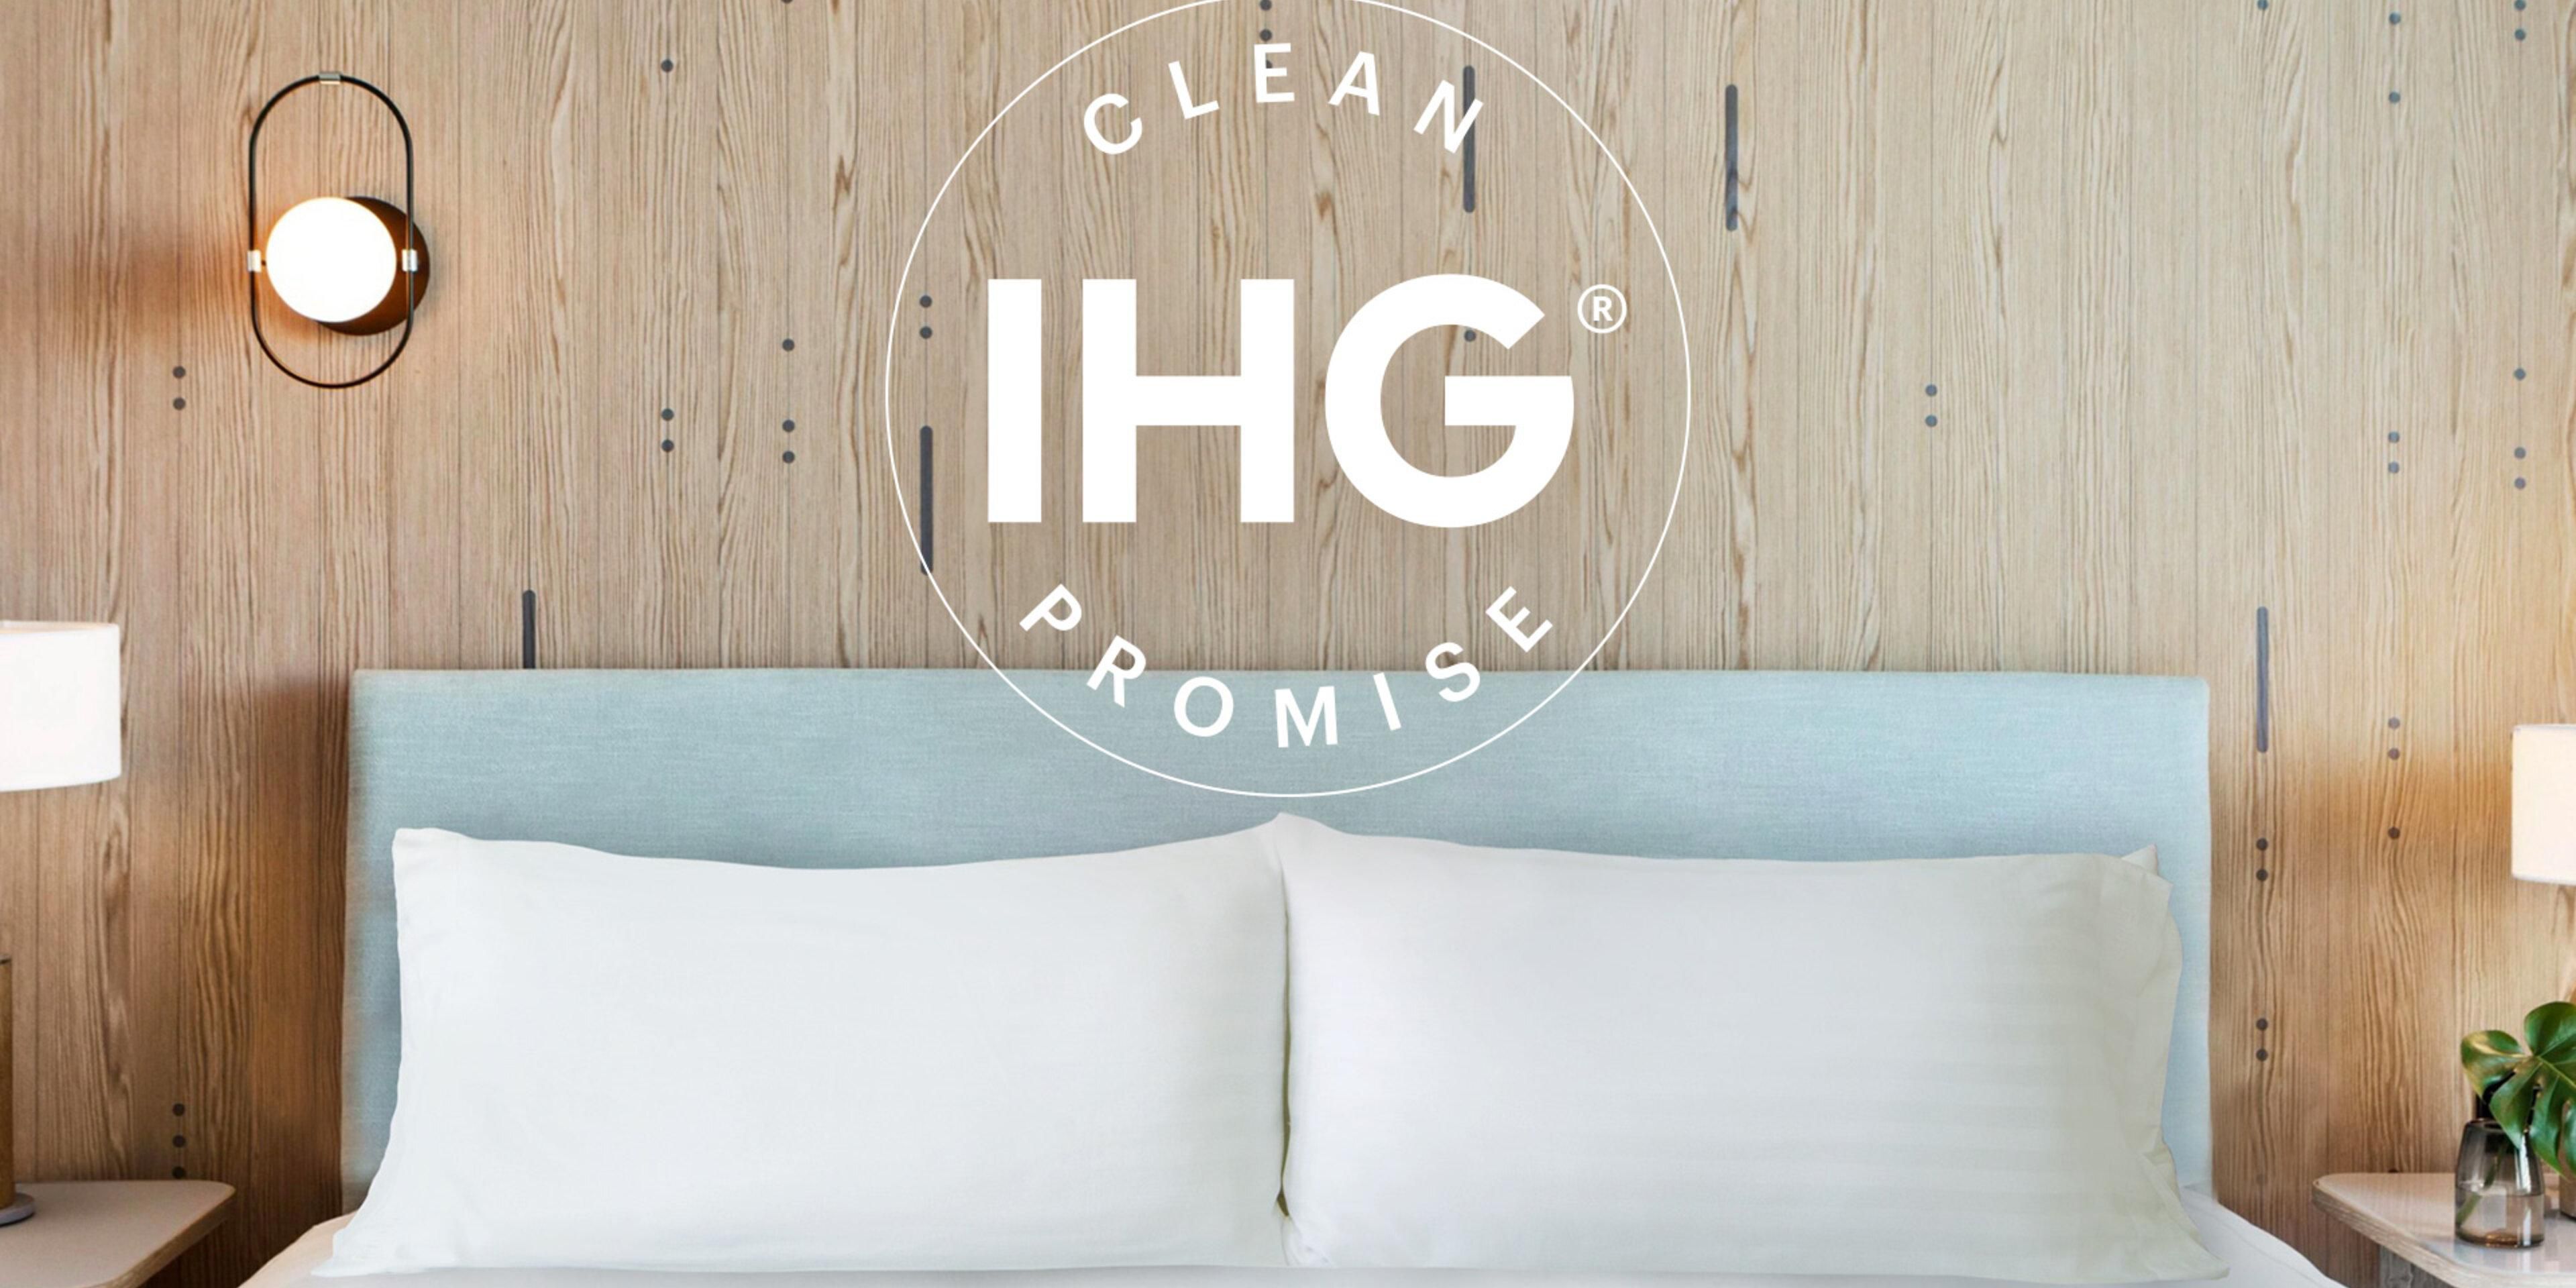 As the world adjusts to new travel norms and expectations, we’re enhancing the experience for you – our hotel guests – by redefining cleanliness and supporting your well-being throughout your stay.